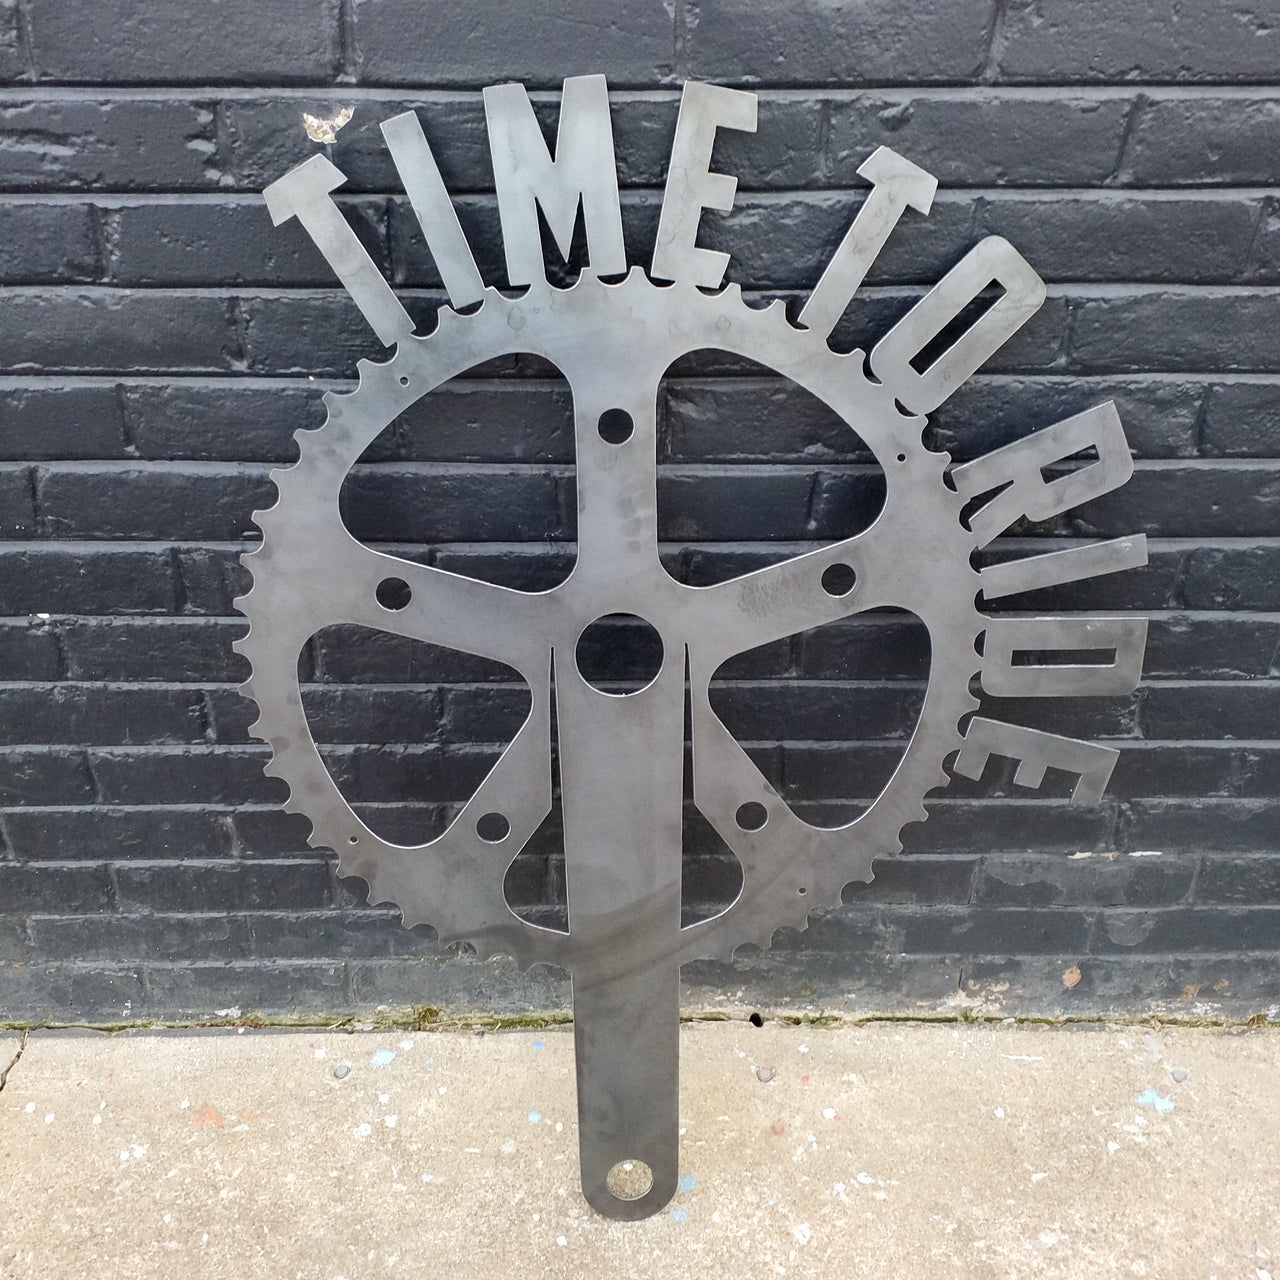 Time to Ride! Bike Gear - Fitness Home Gym Sign - Work Out, Exercise, Biking Wall Art